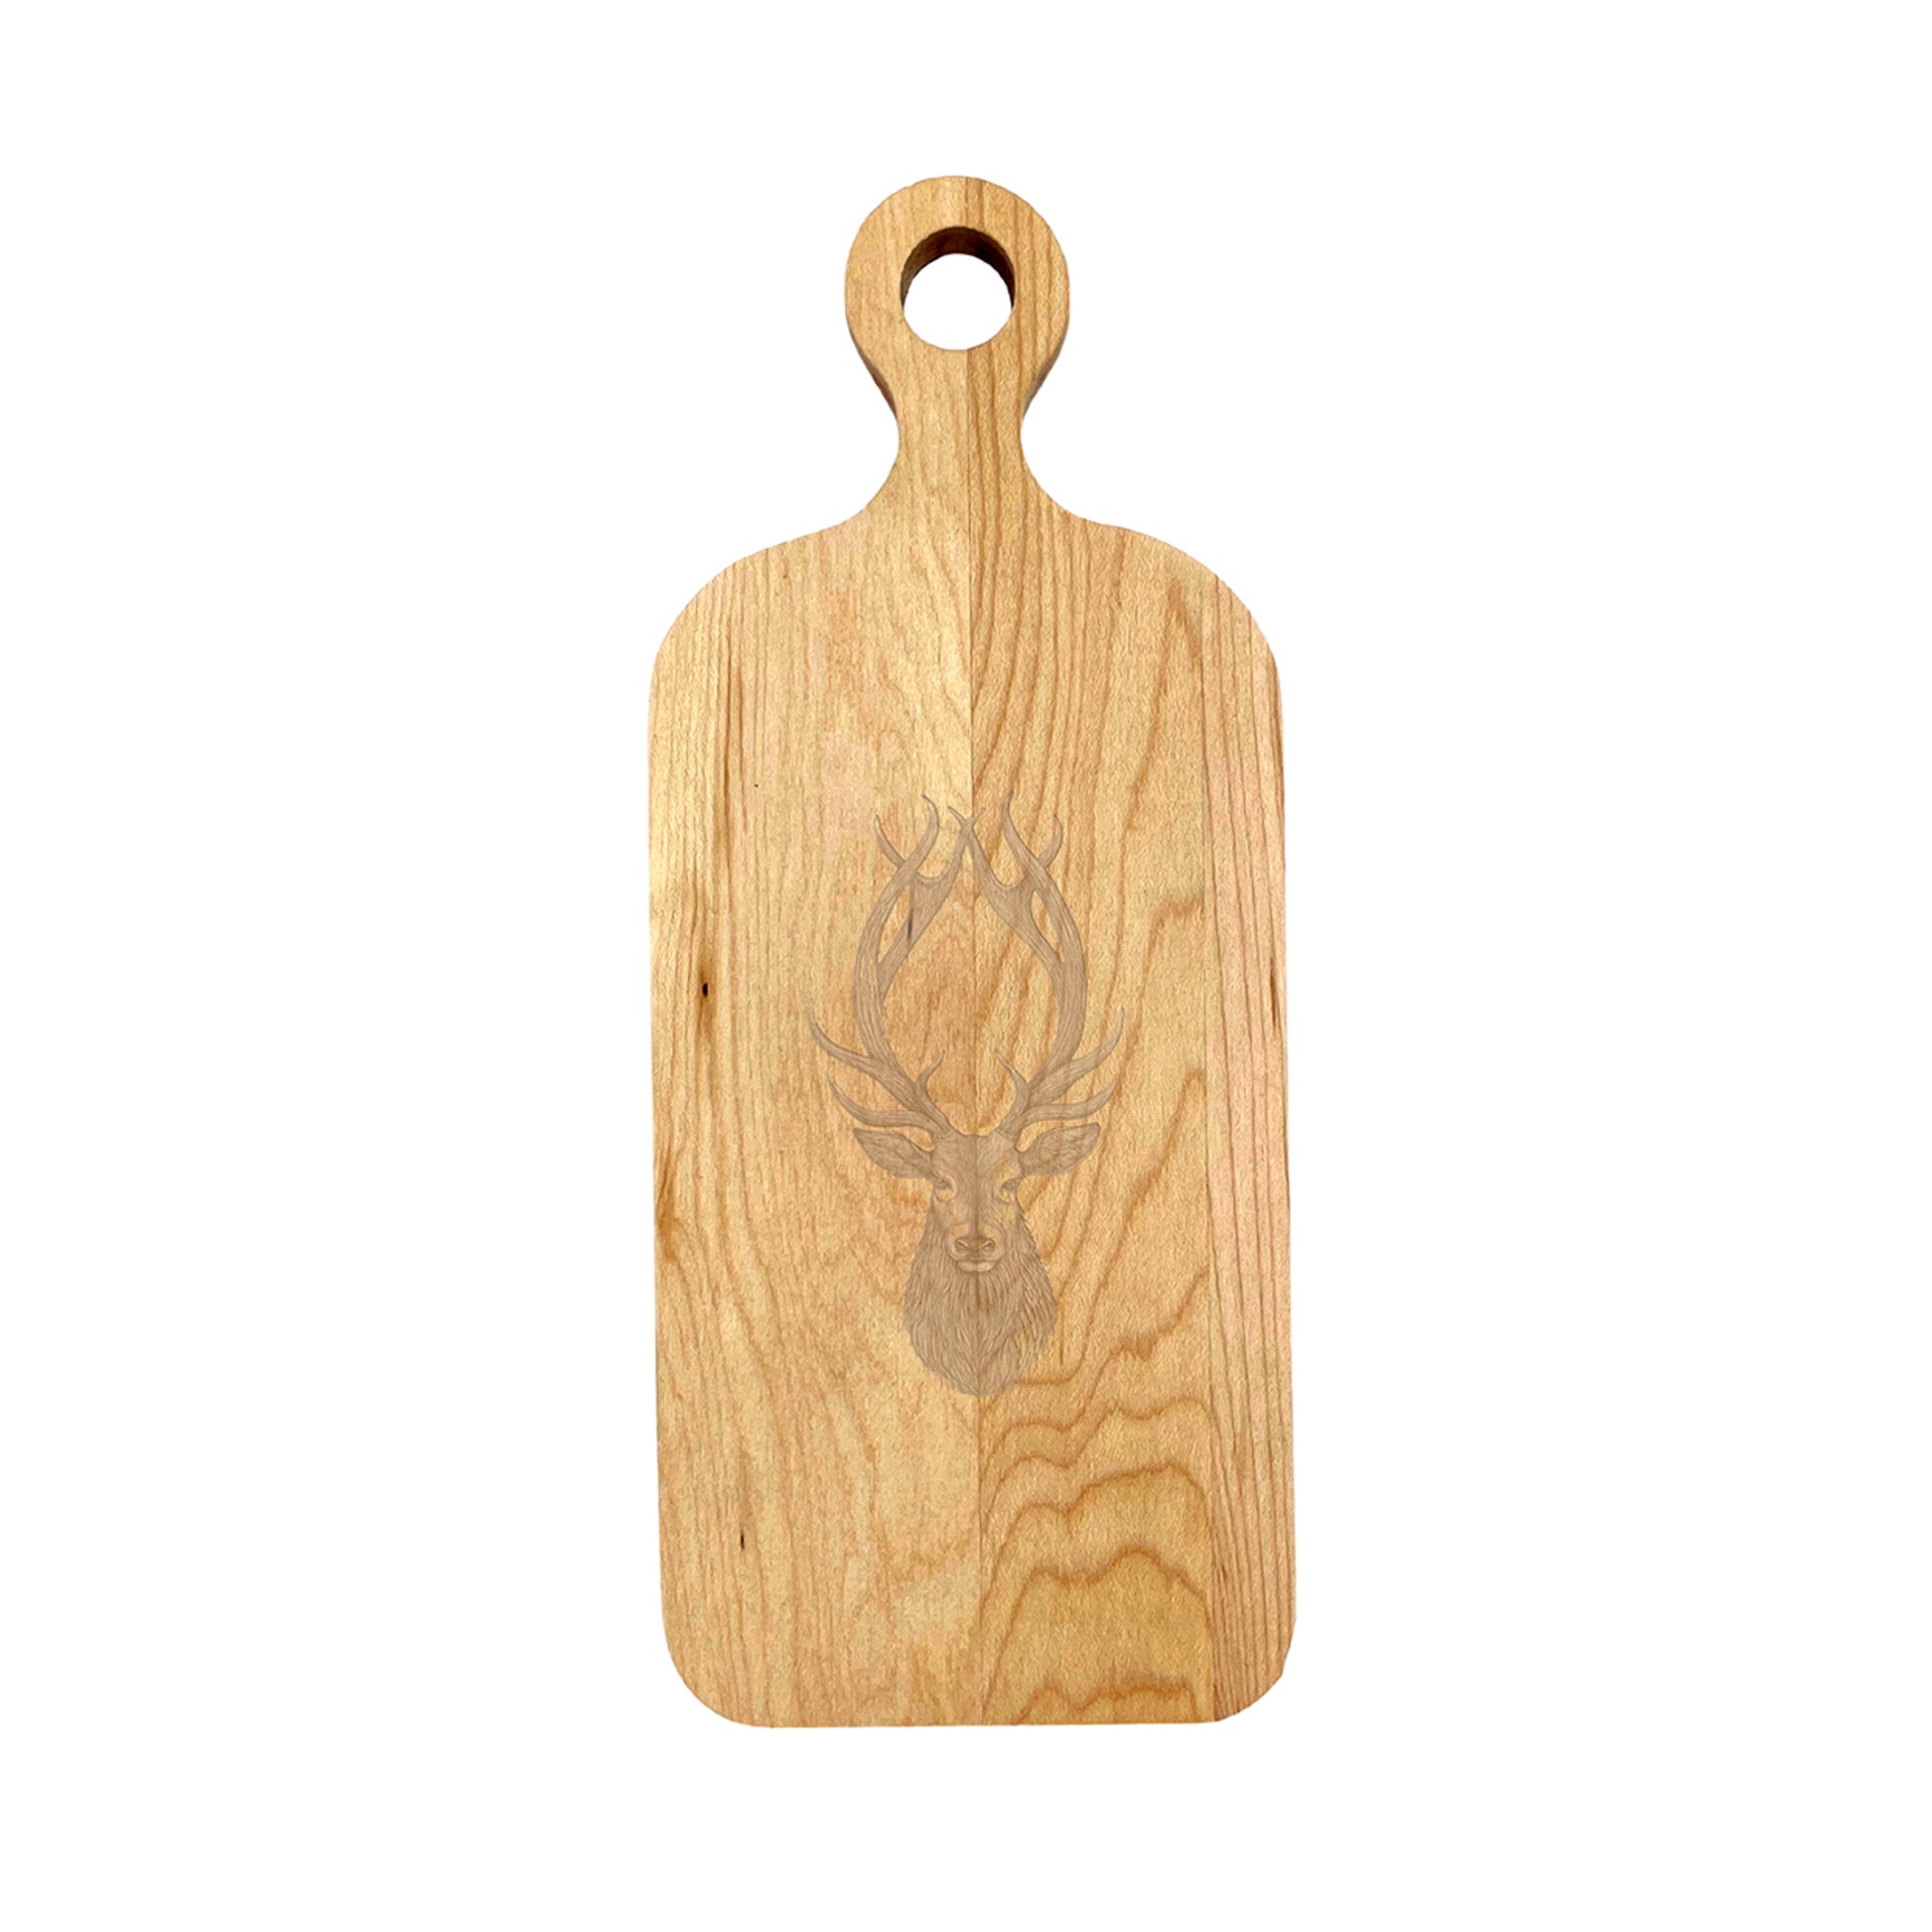 Laura Zindel Small Maple Paddle Serving Board - More designs available